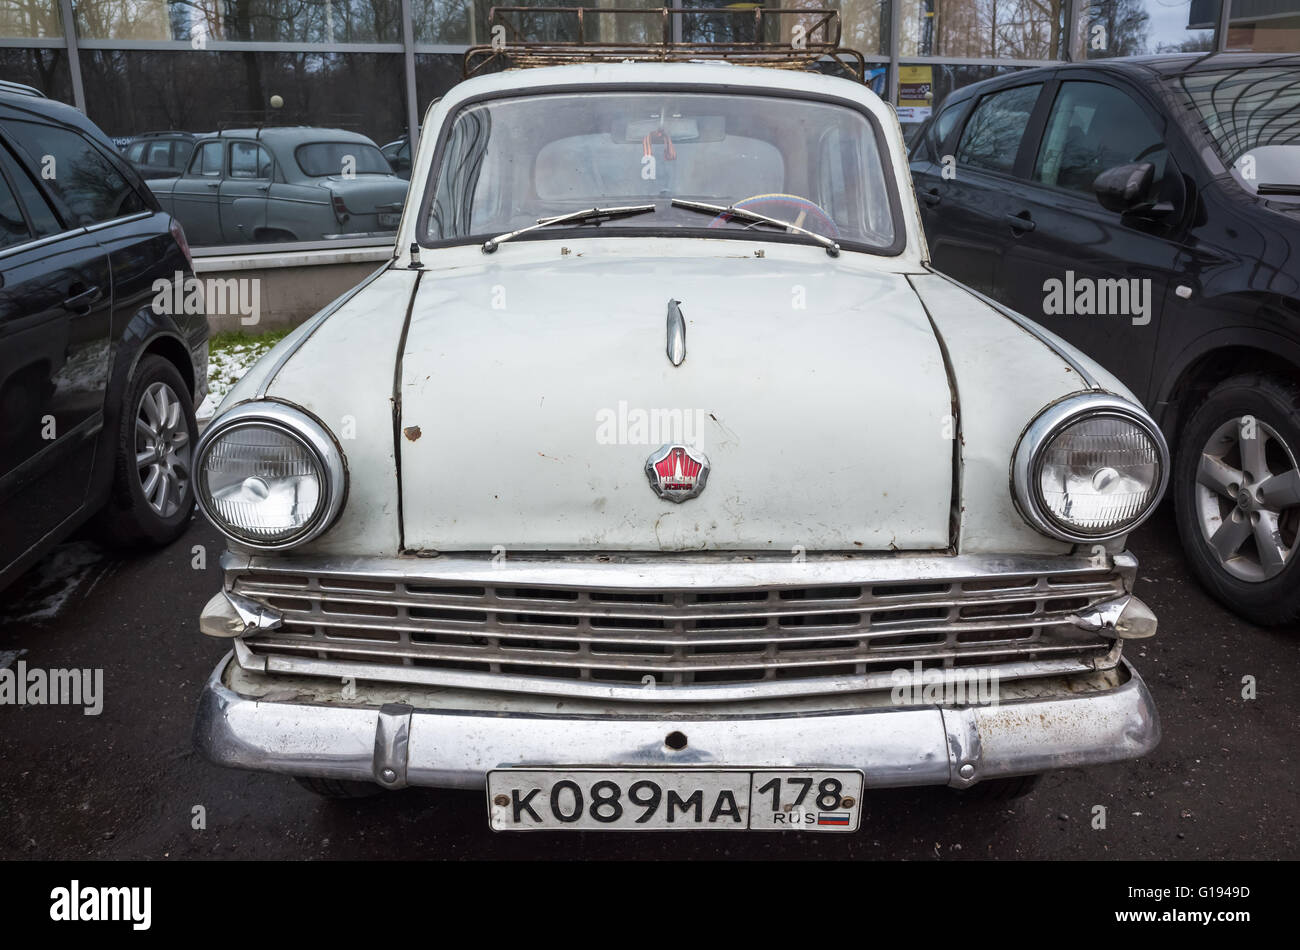 Saint-Petersburg, Russia - April 15, 2016: Gray old-timer Moskvitch-403 compact car manufactured by the former Soviet automobile Stock Photo